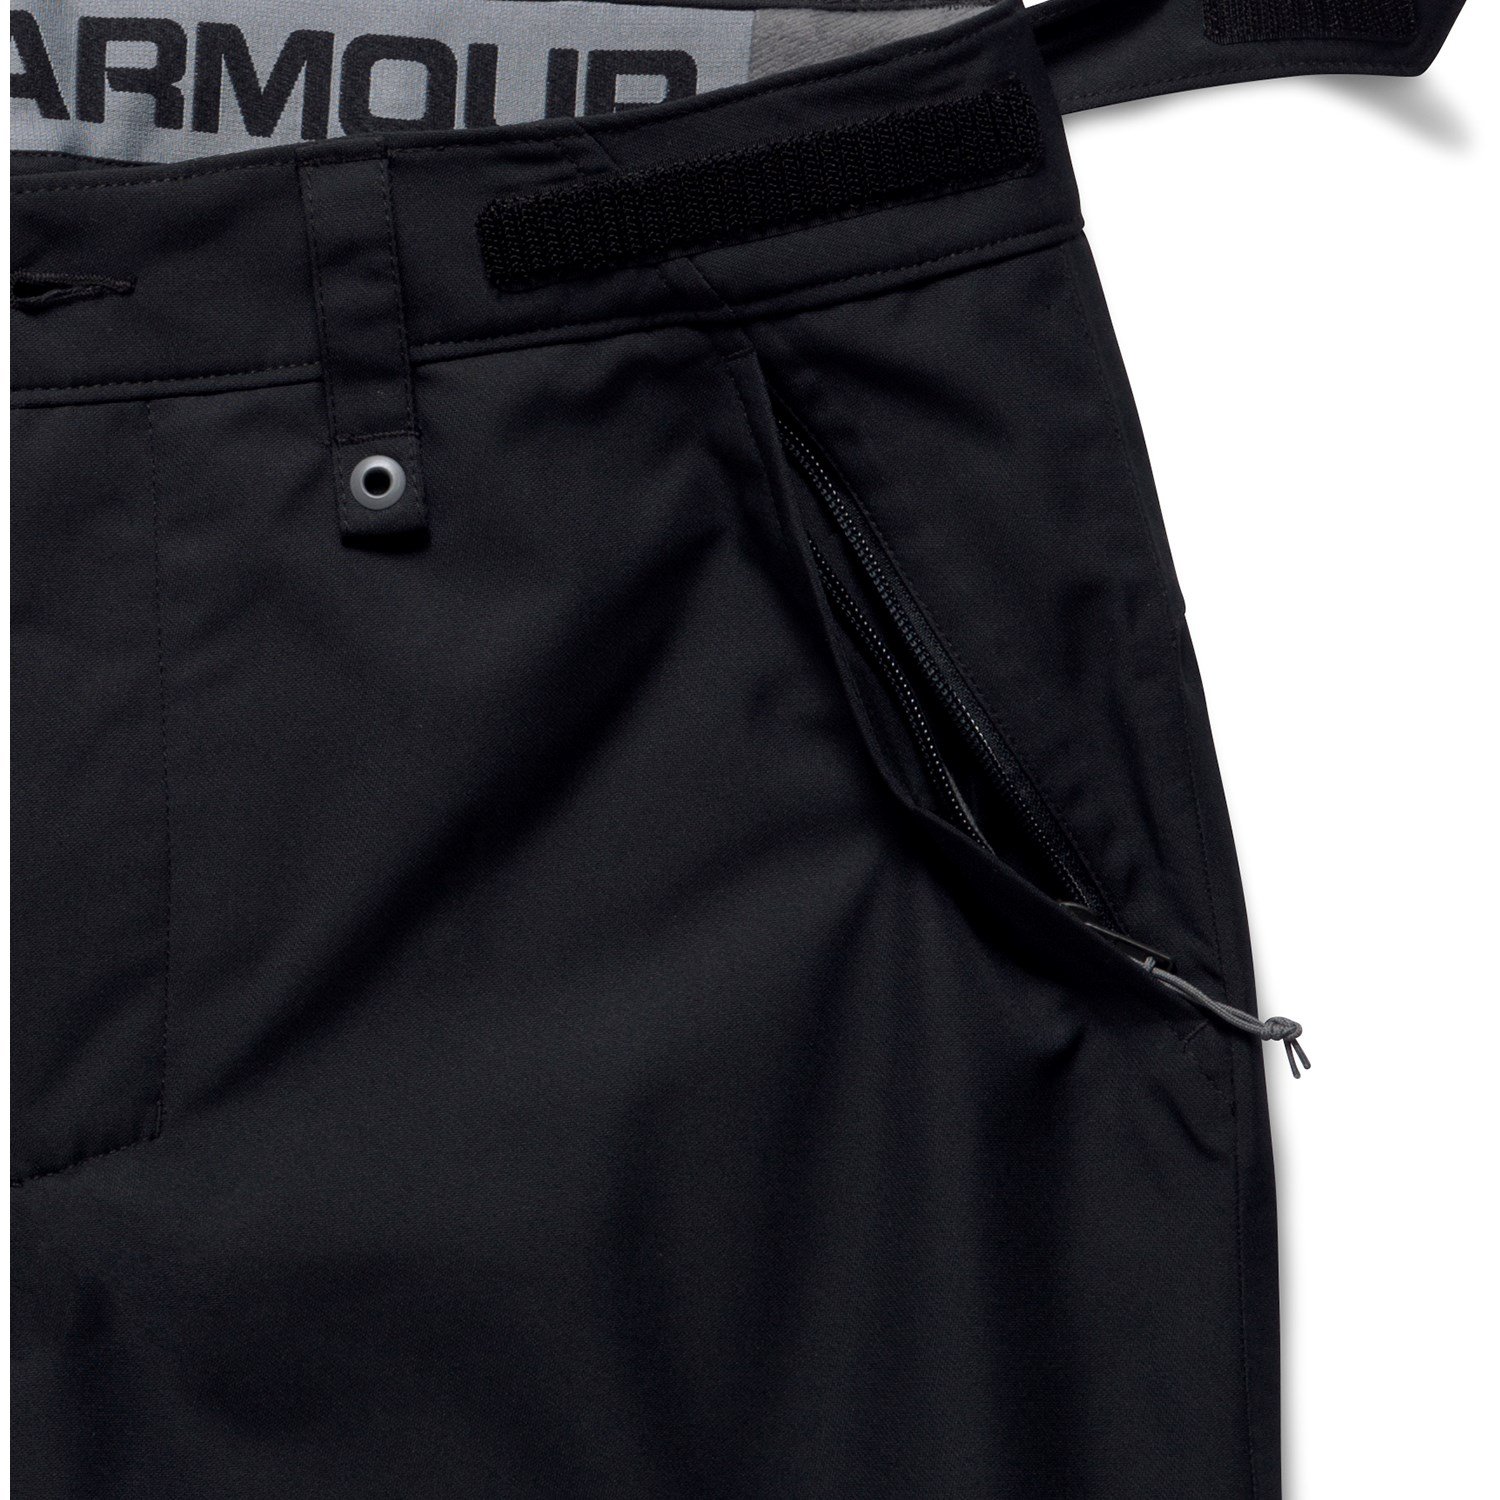 under armour shorts with zip pockets